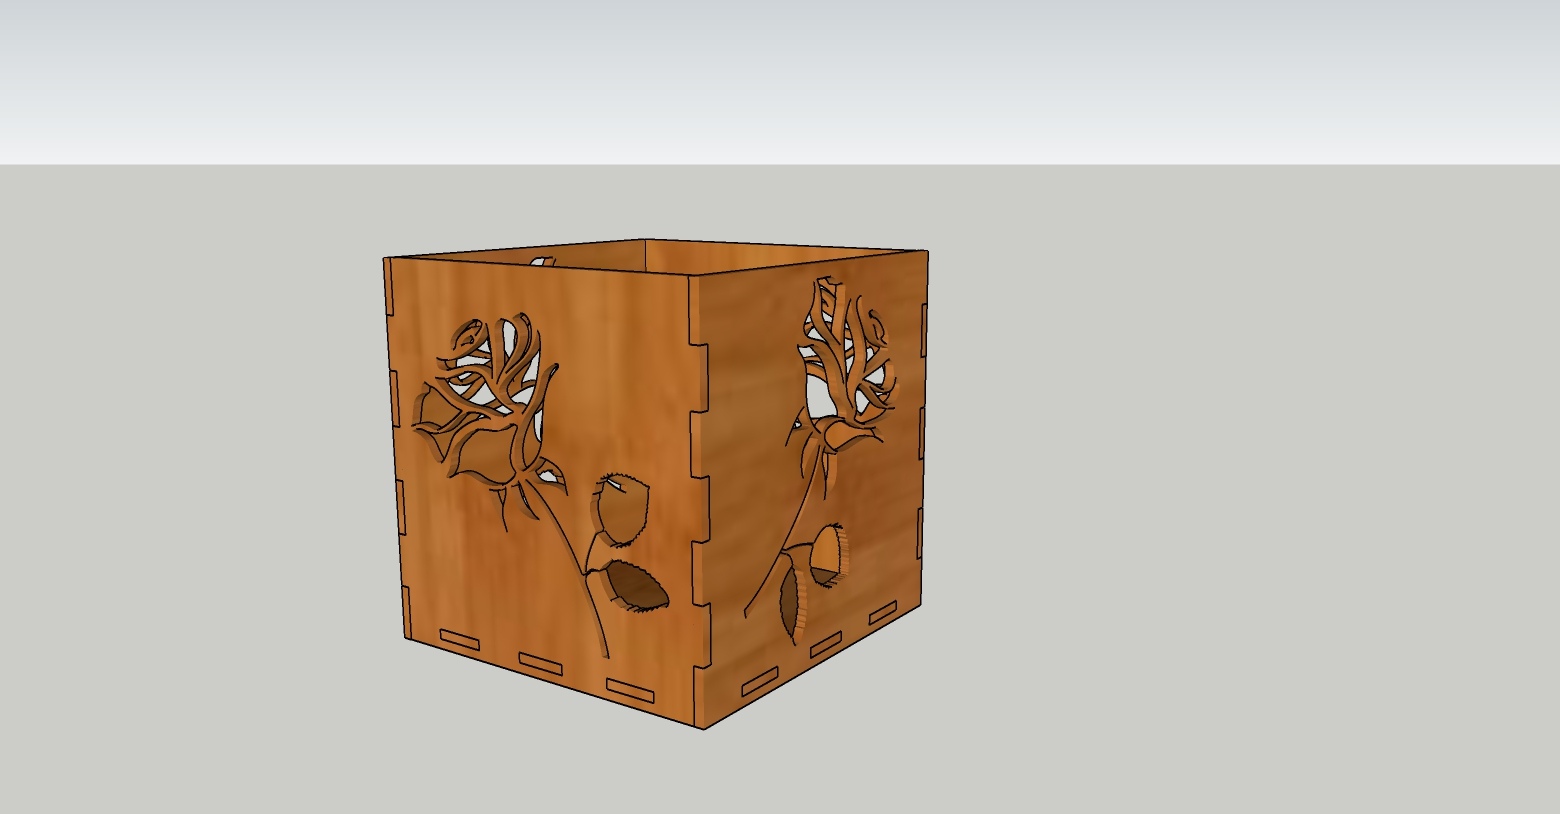 Laser Cut Rose Box For March 8 Free CDR Vectors Art